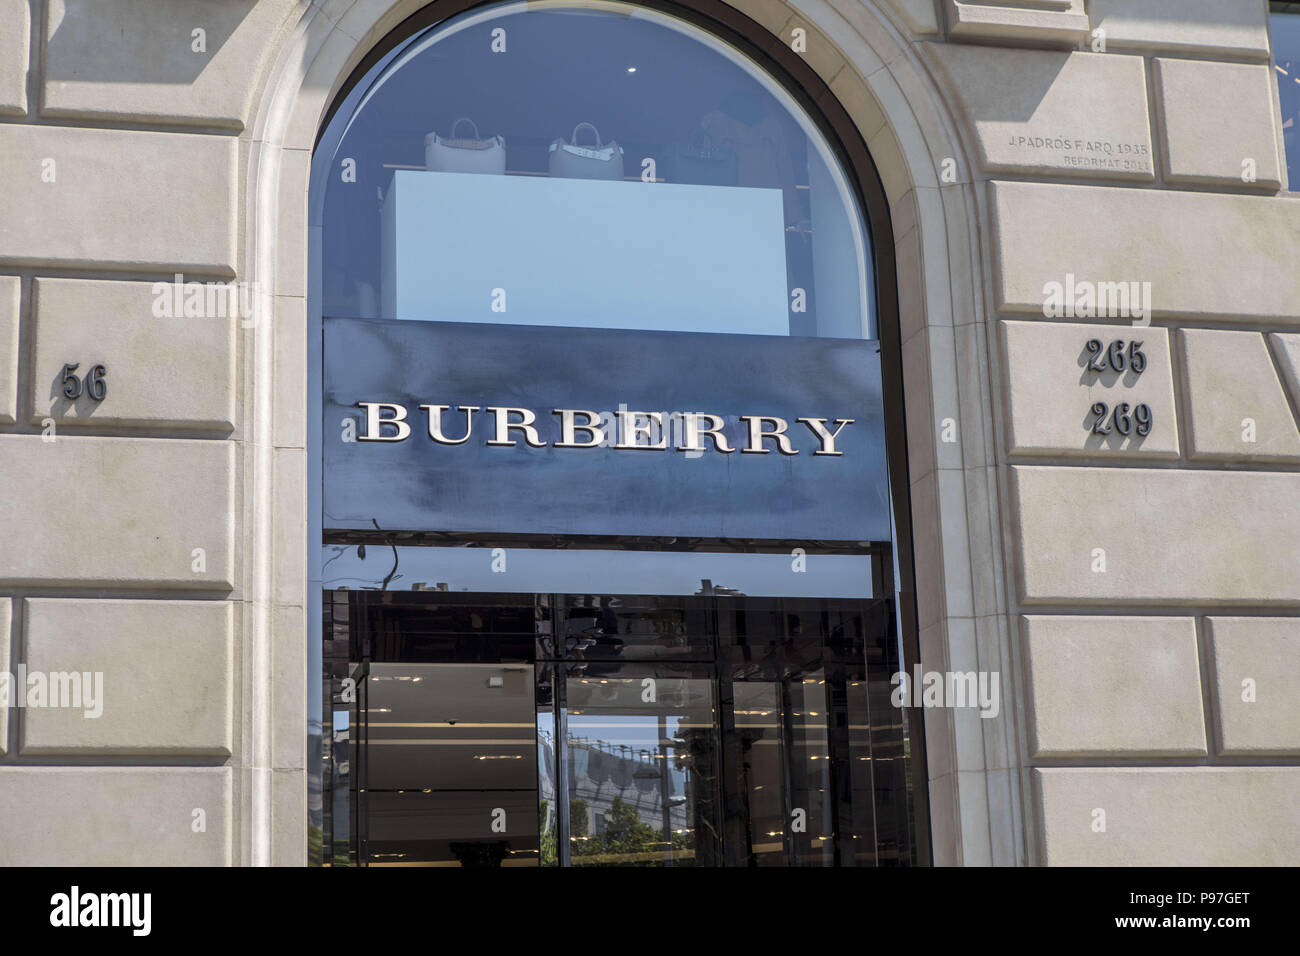 Burberry sign on Passeig de Gràcia street in Barcelona. Barcelona is a city  in Spain. It is the capital and largest city of Catalonia, as well as the  second most populous municipality of Spain. In 2009 the city was ranked  Europe's third and one of the world's ...